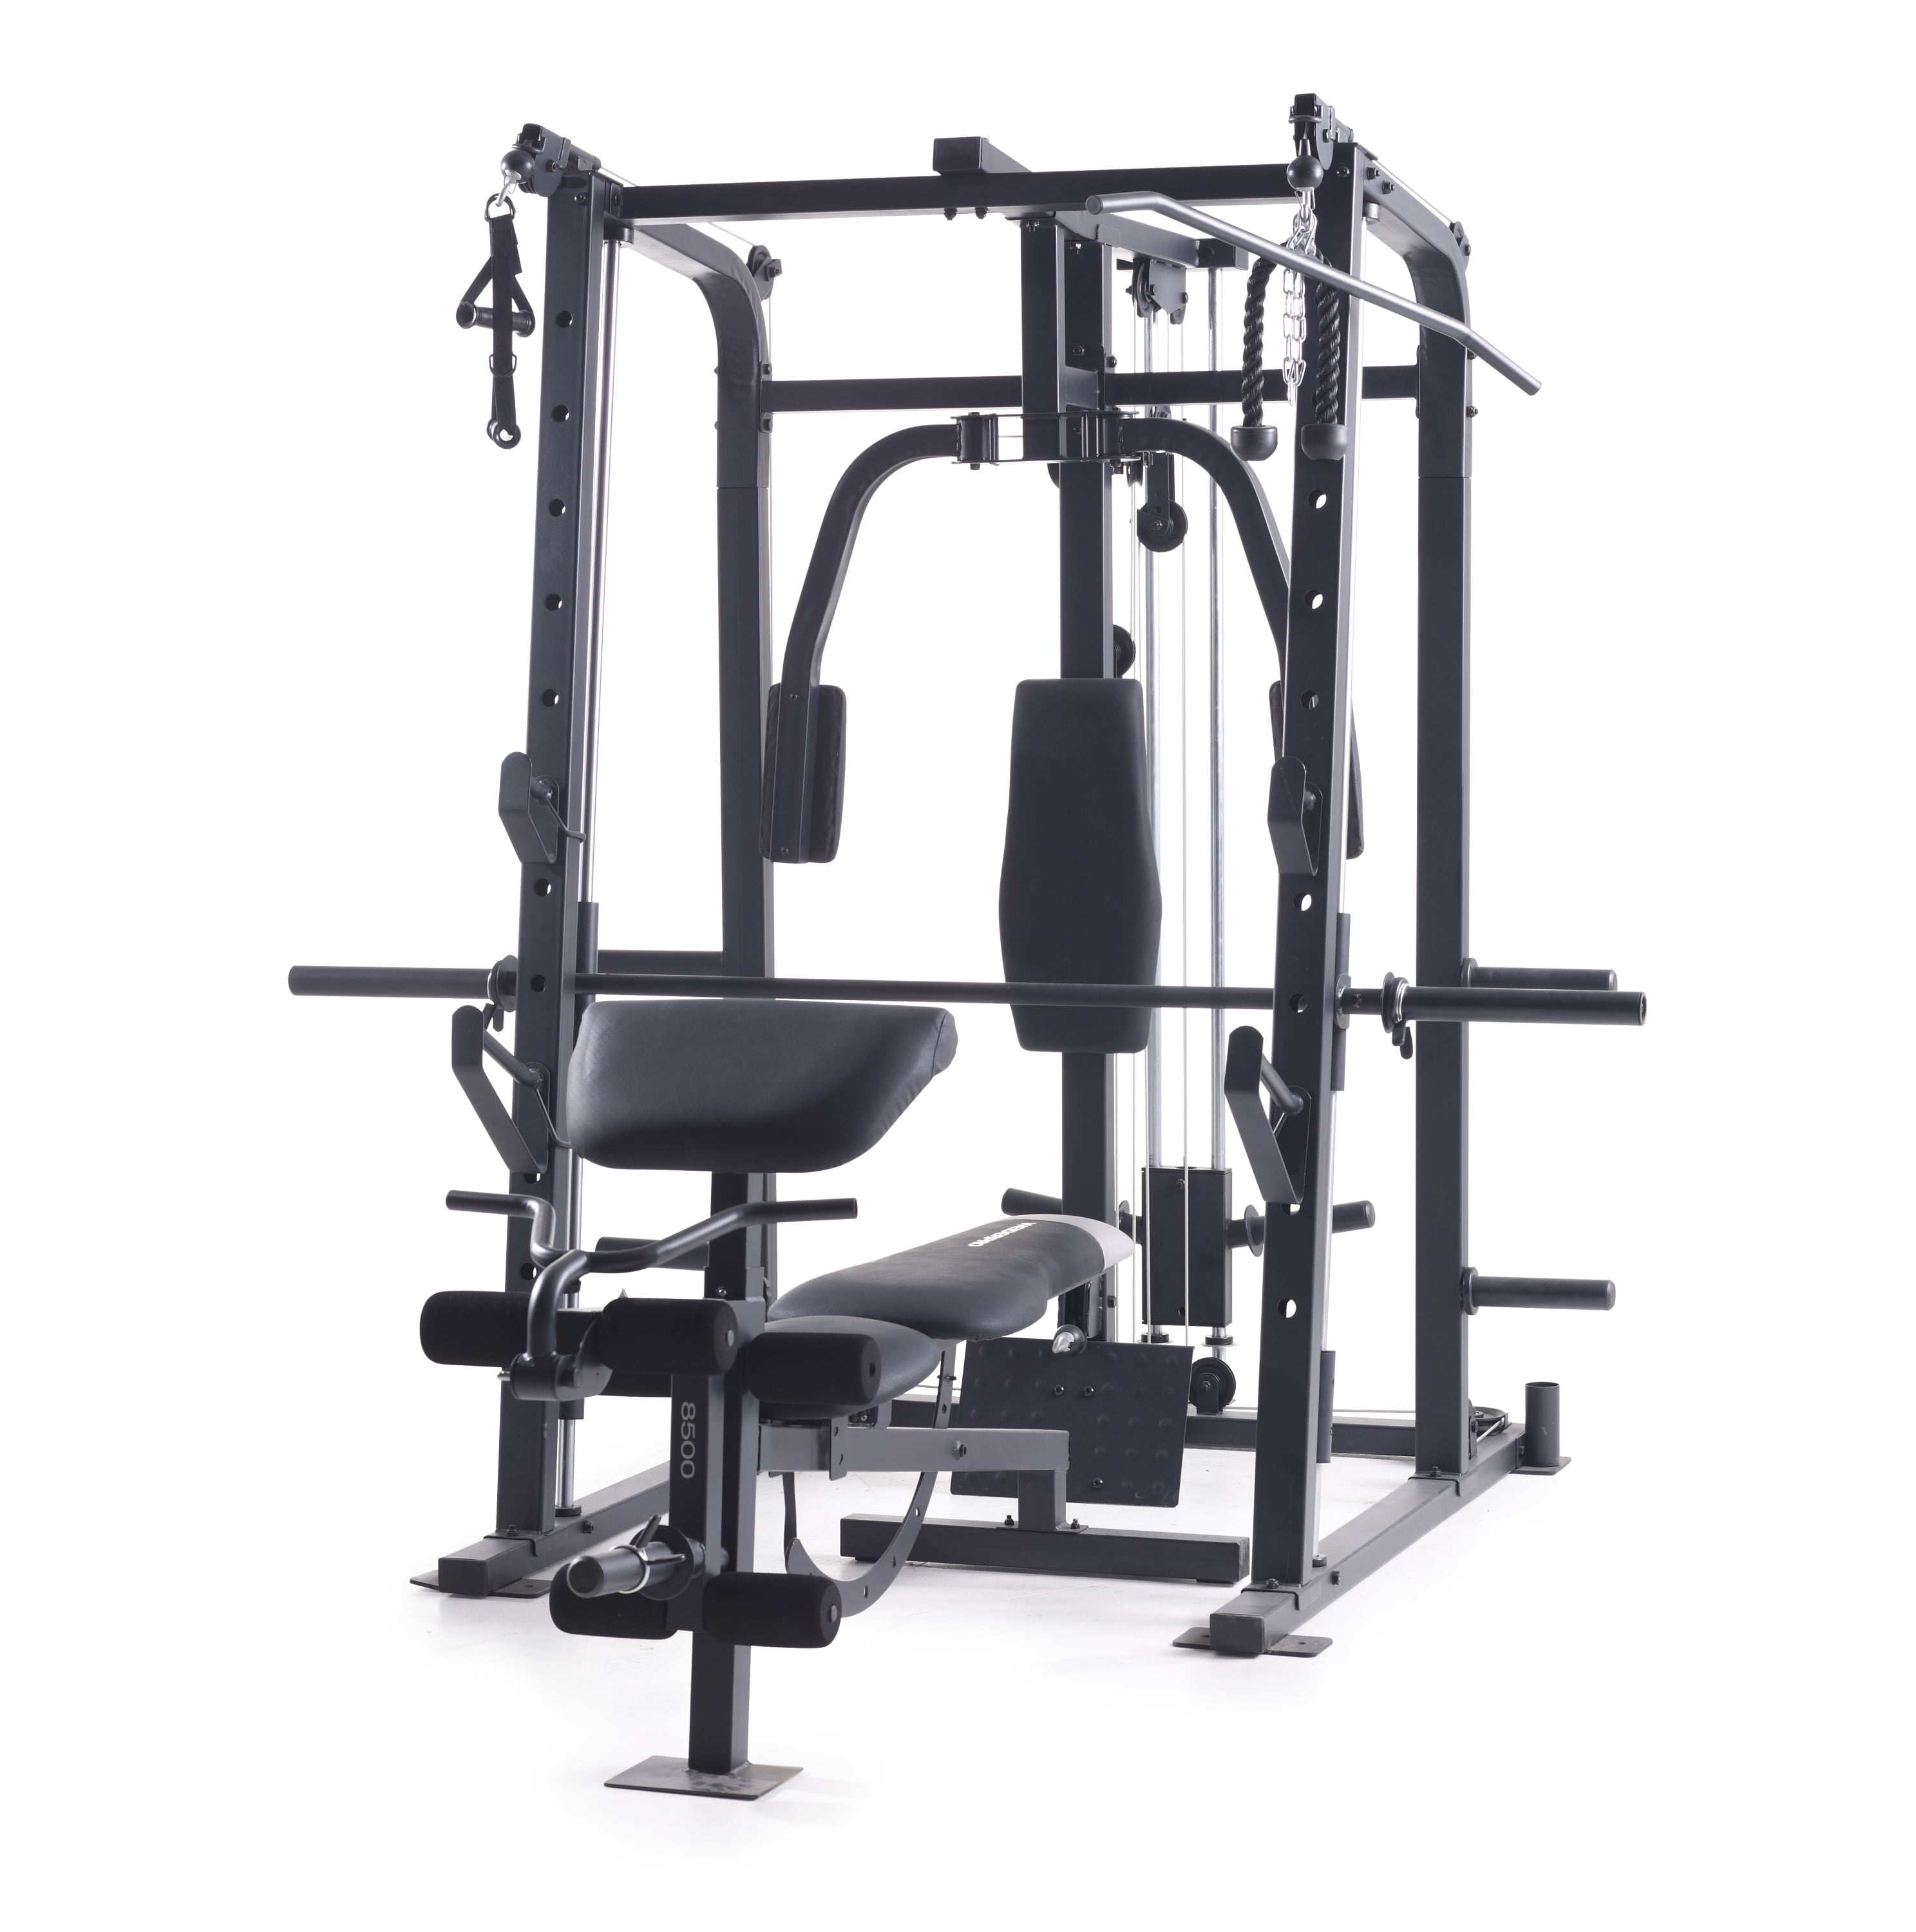 Weider 8500 Cage System with 300 lb. Total Weight - Walmart.com